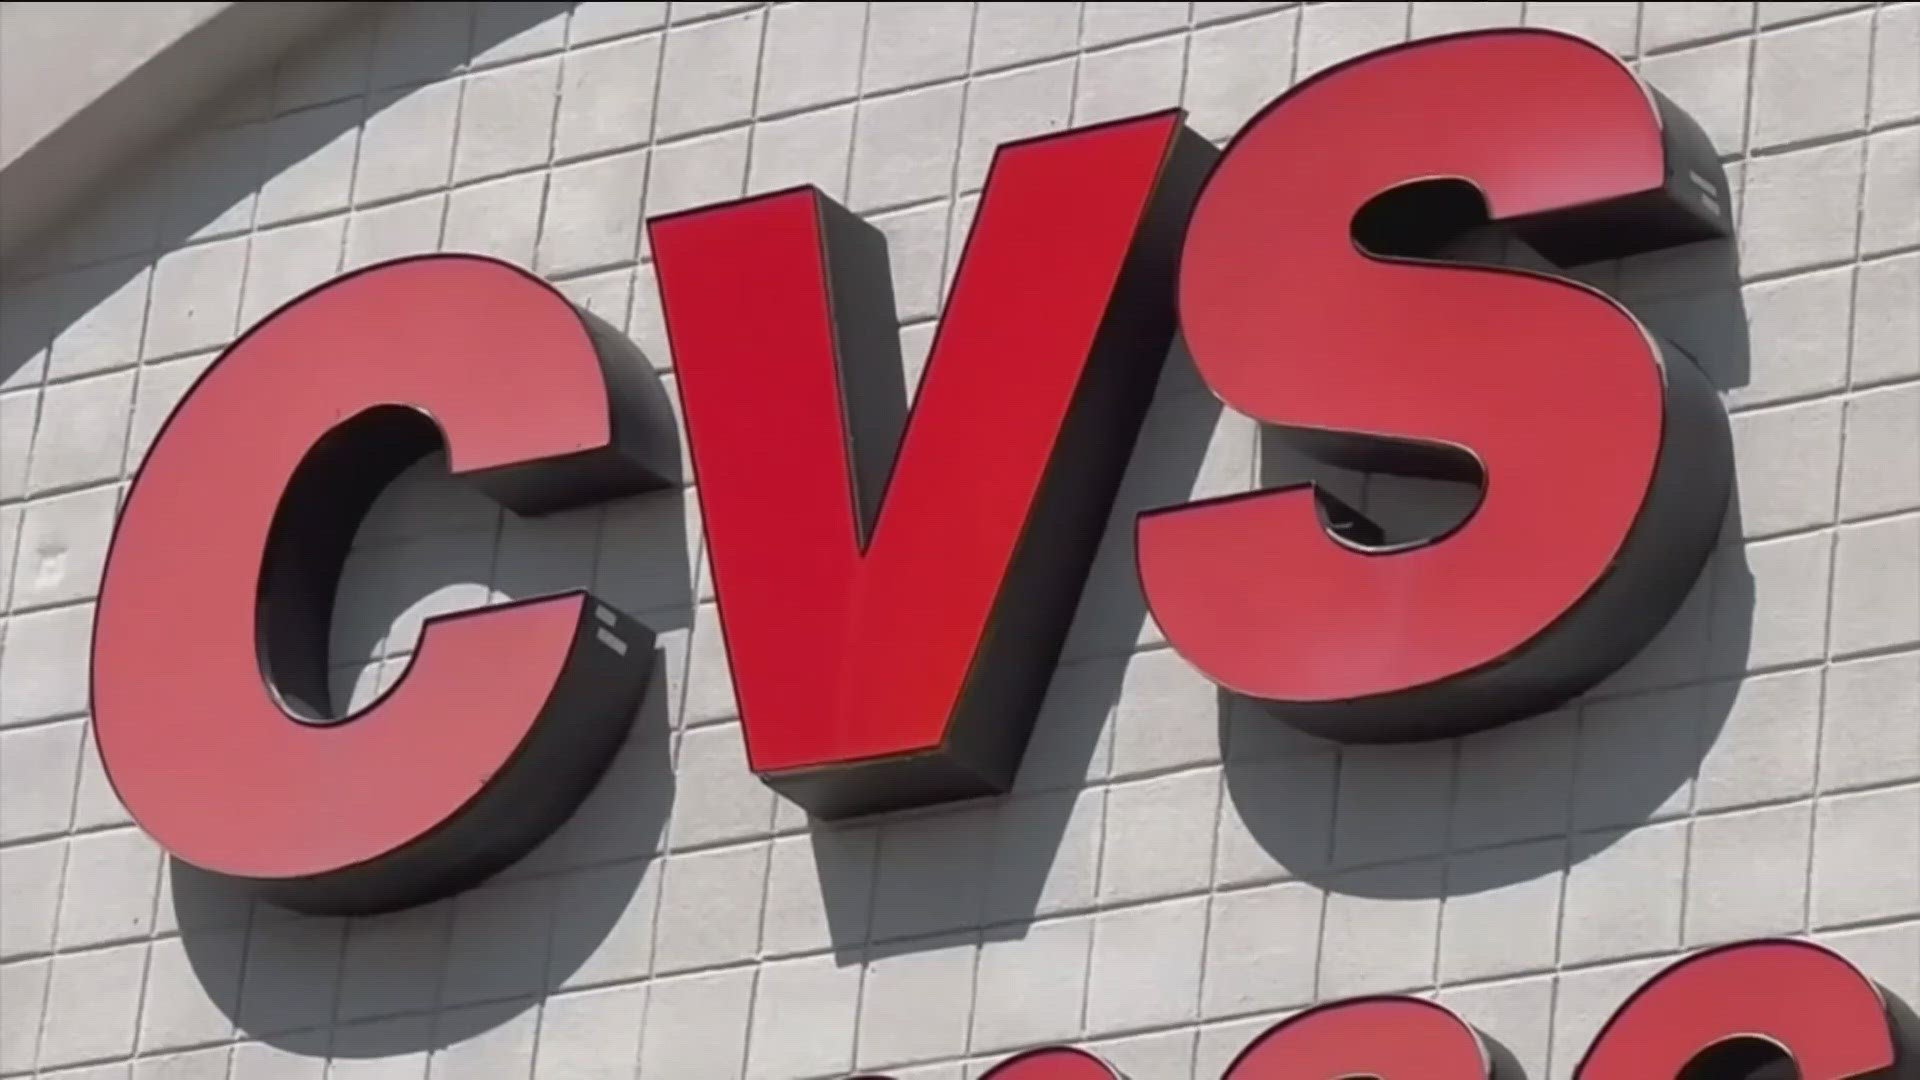 The Ohio Board of Pharmacy and CVS announced Thursday that they had settled claims of critical understaffing at 22 Ohio stores owned by CVS, including one in Toledo.